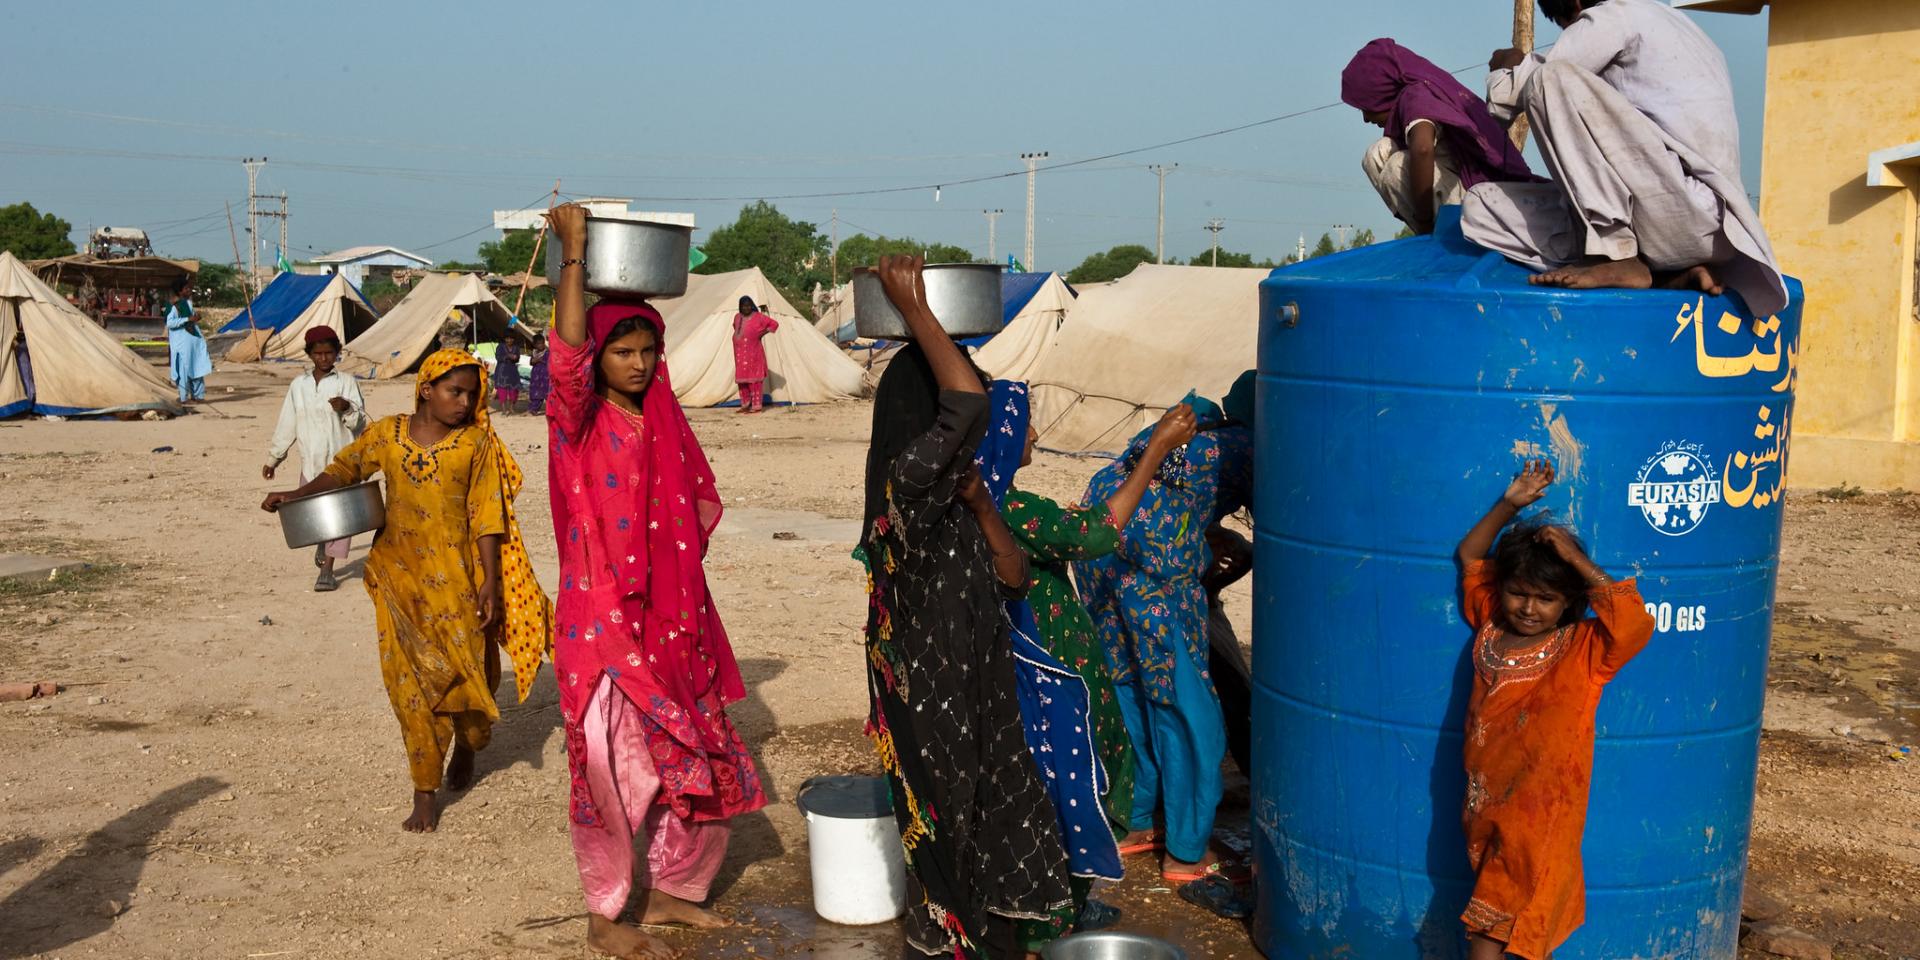 In the outskirts of Thata in Pakistan, women displaced by the 2010 flooding line up to fetch water.